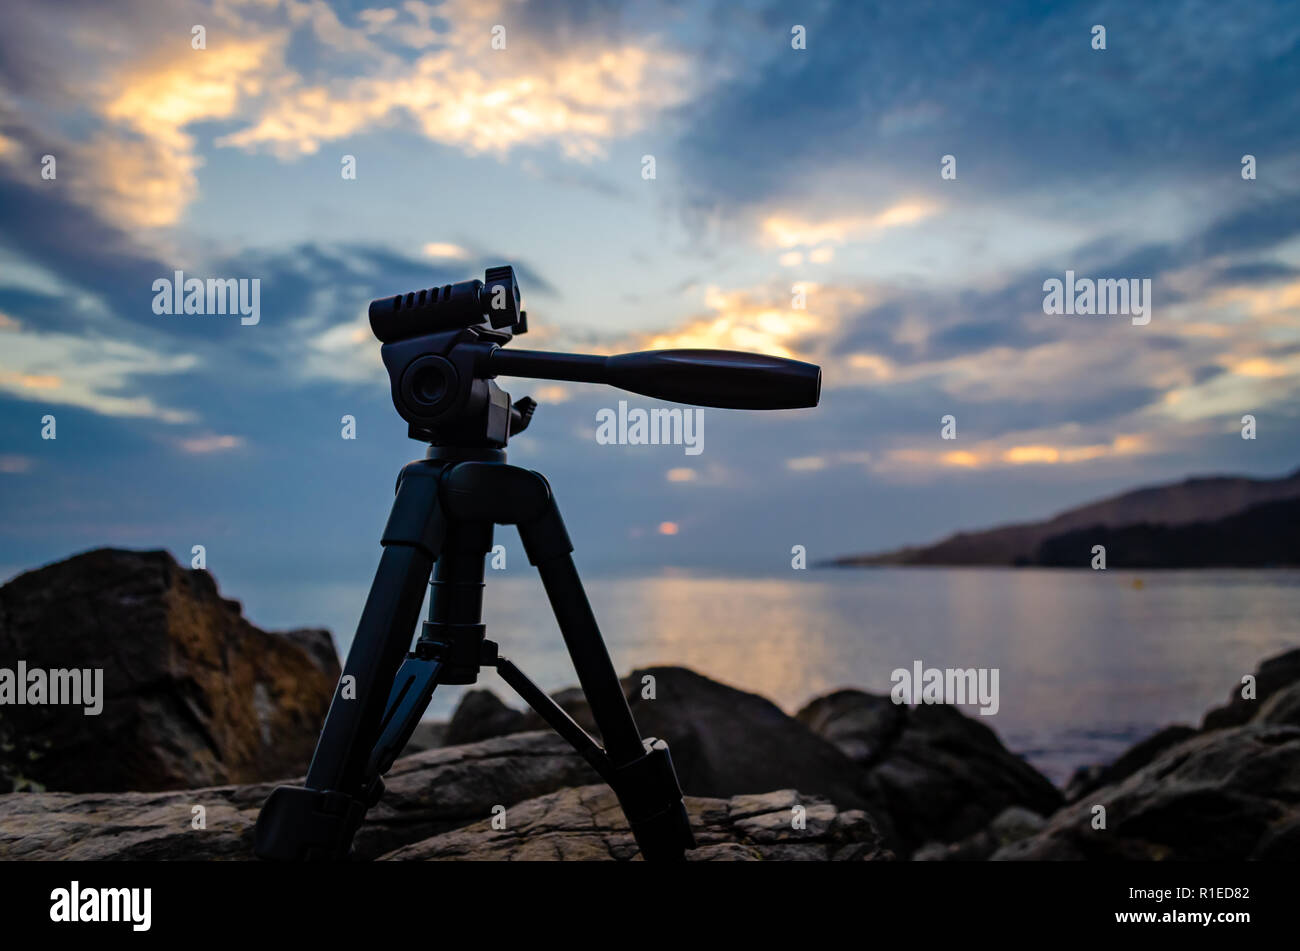 Low key shot of a tripod placed on rocks during sunrise. Stock Photo